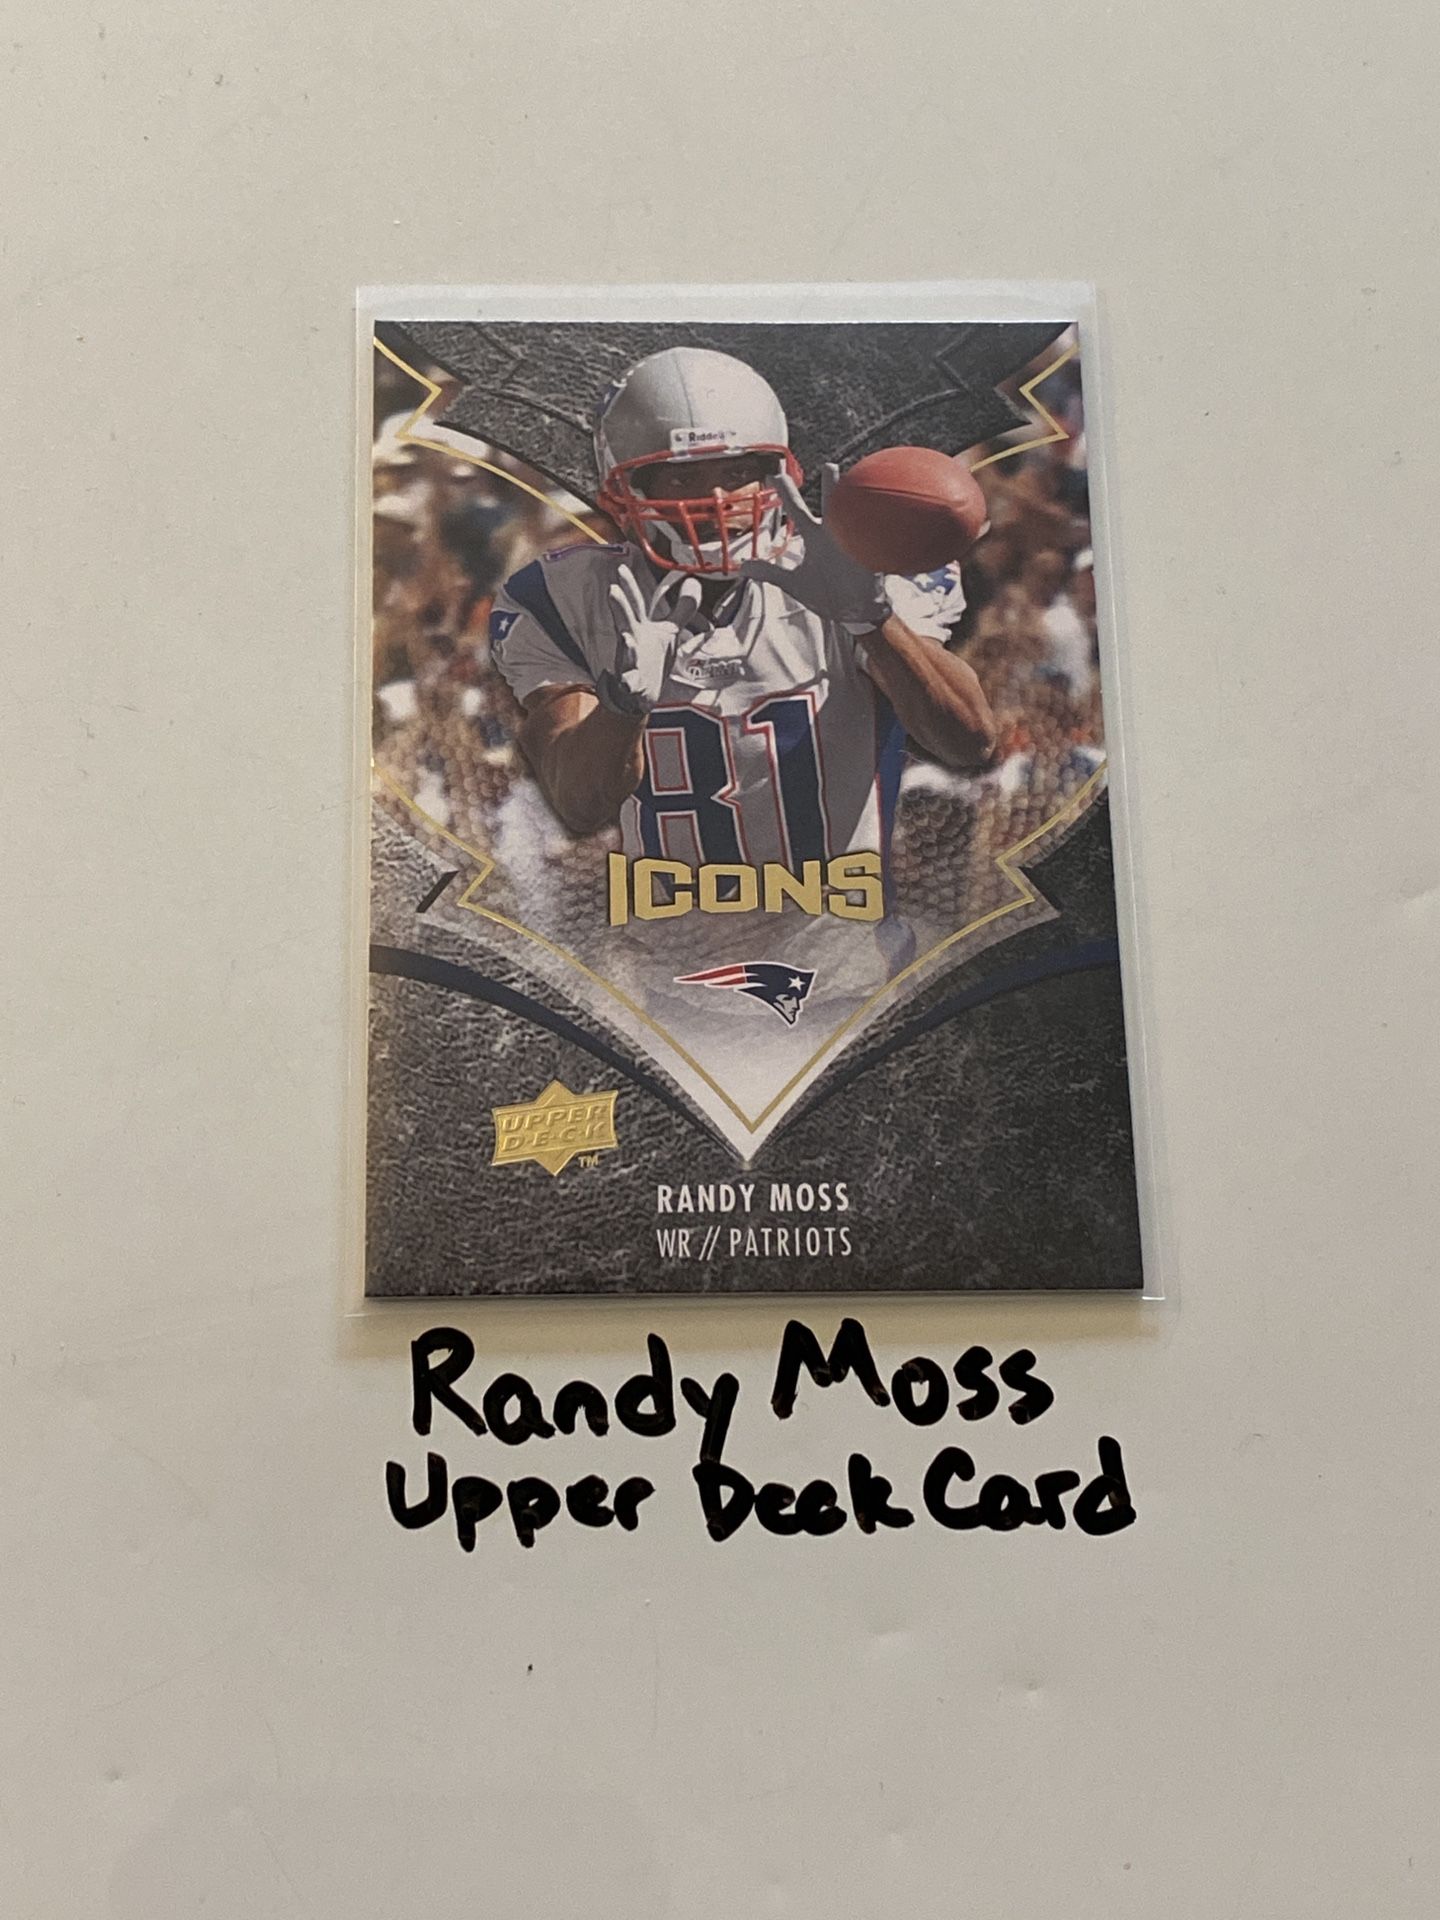 Randy Moss New England Patriots Hall of Fame WR Upper Deck Card. 